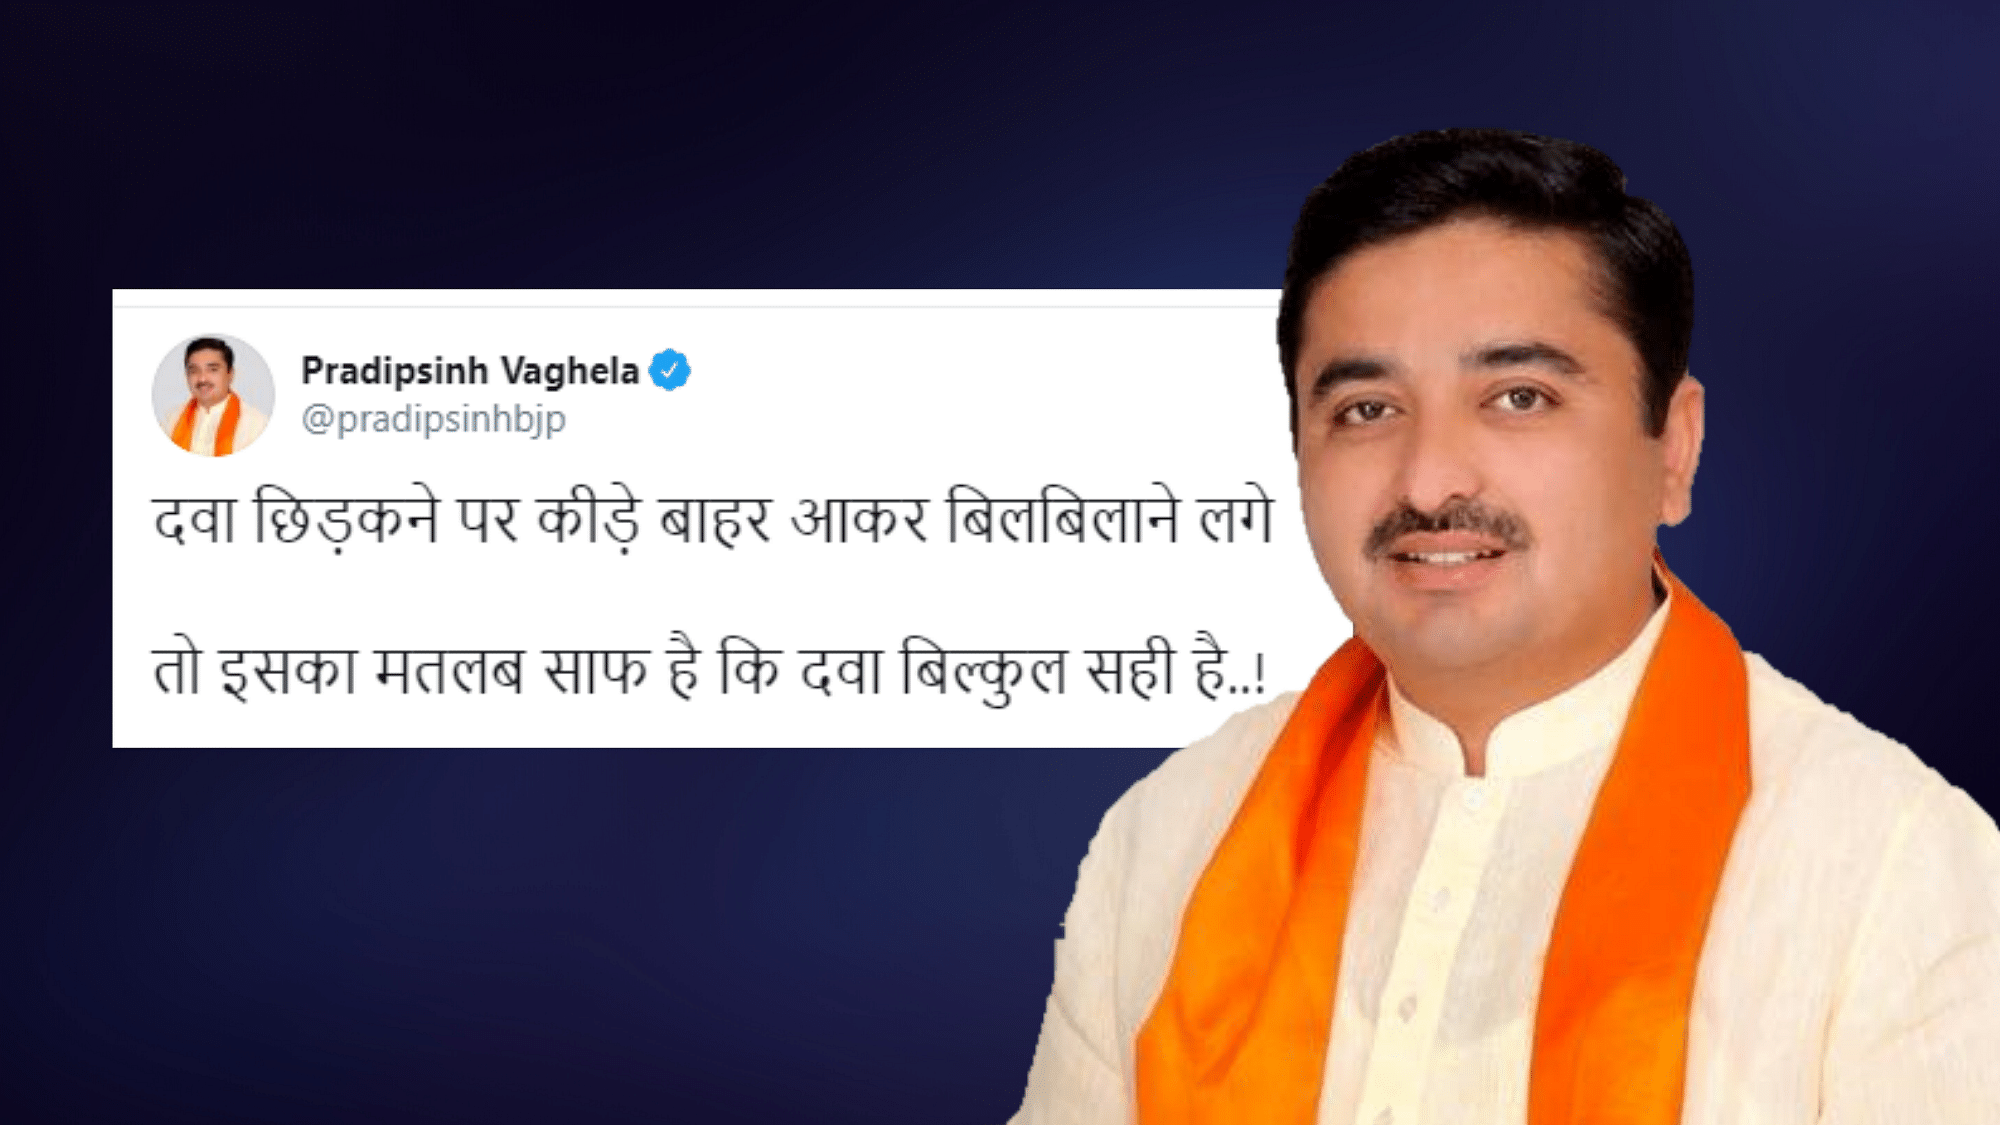 On 19 December, a day that saw many large protests against CAA-NRC, BJP Gujarat Secy Pradipsinh Vaghela posted a seemingly controversial and disparaging tweet.